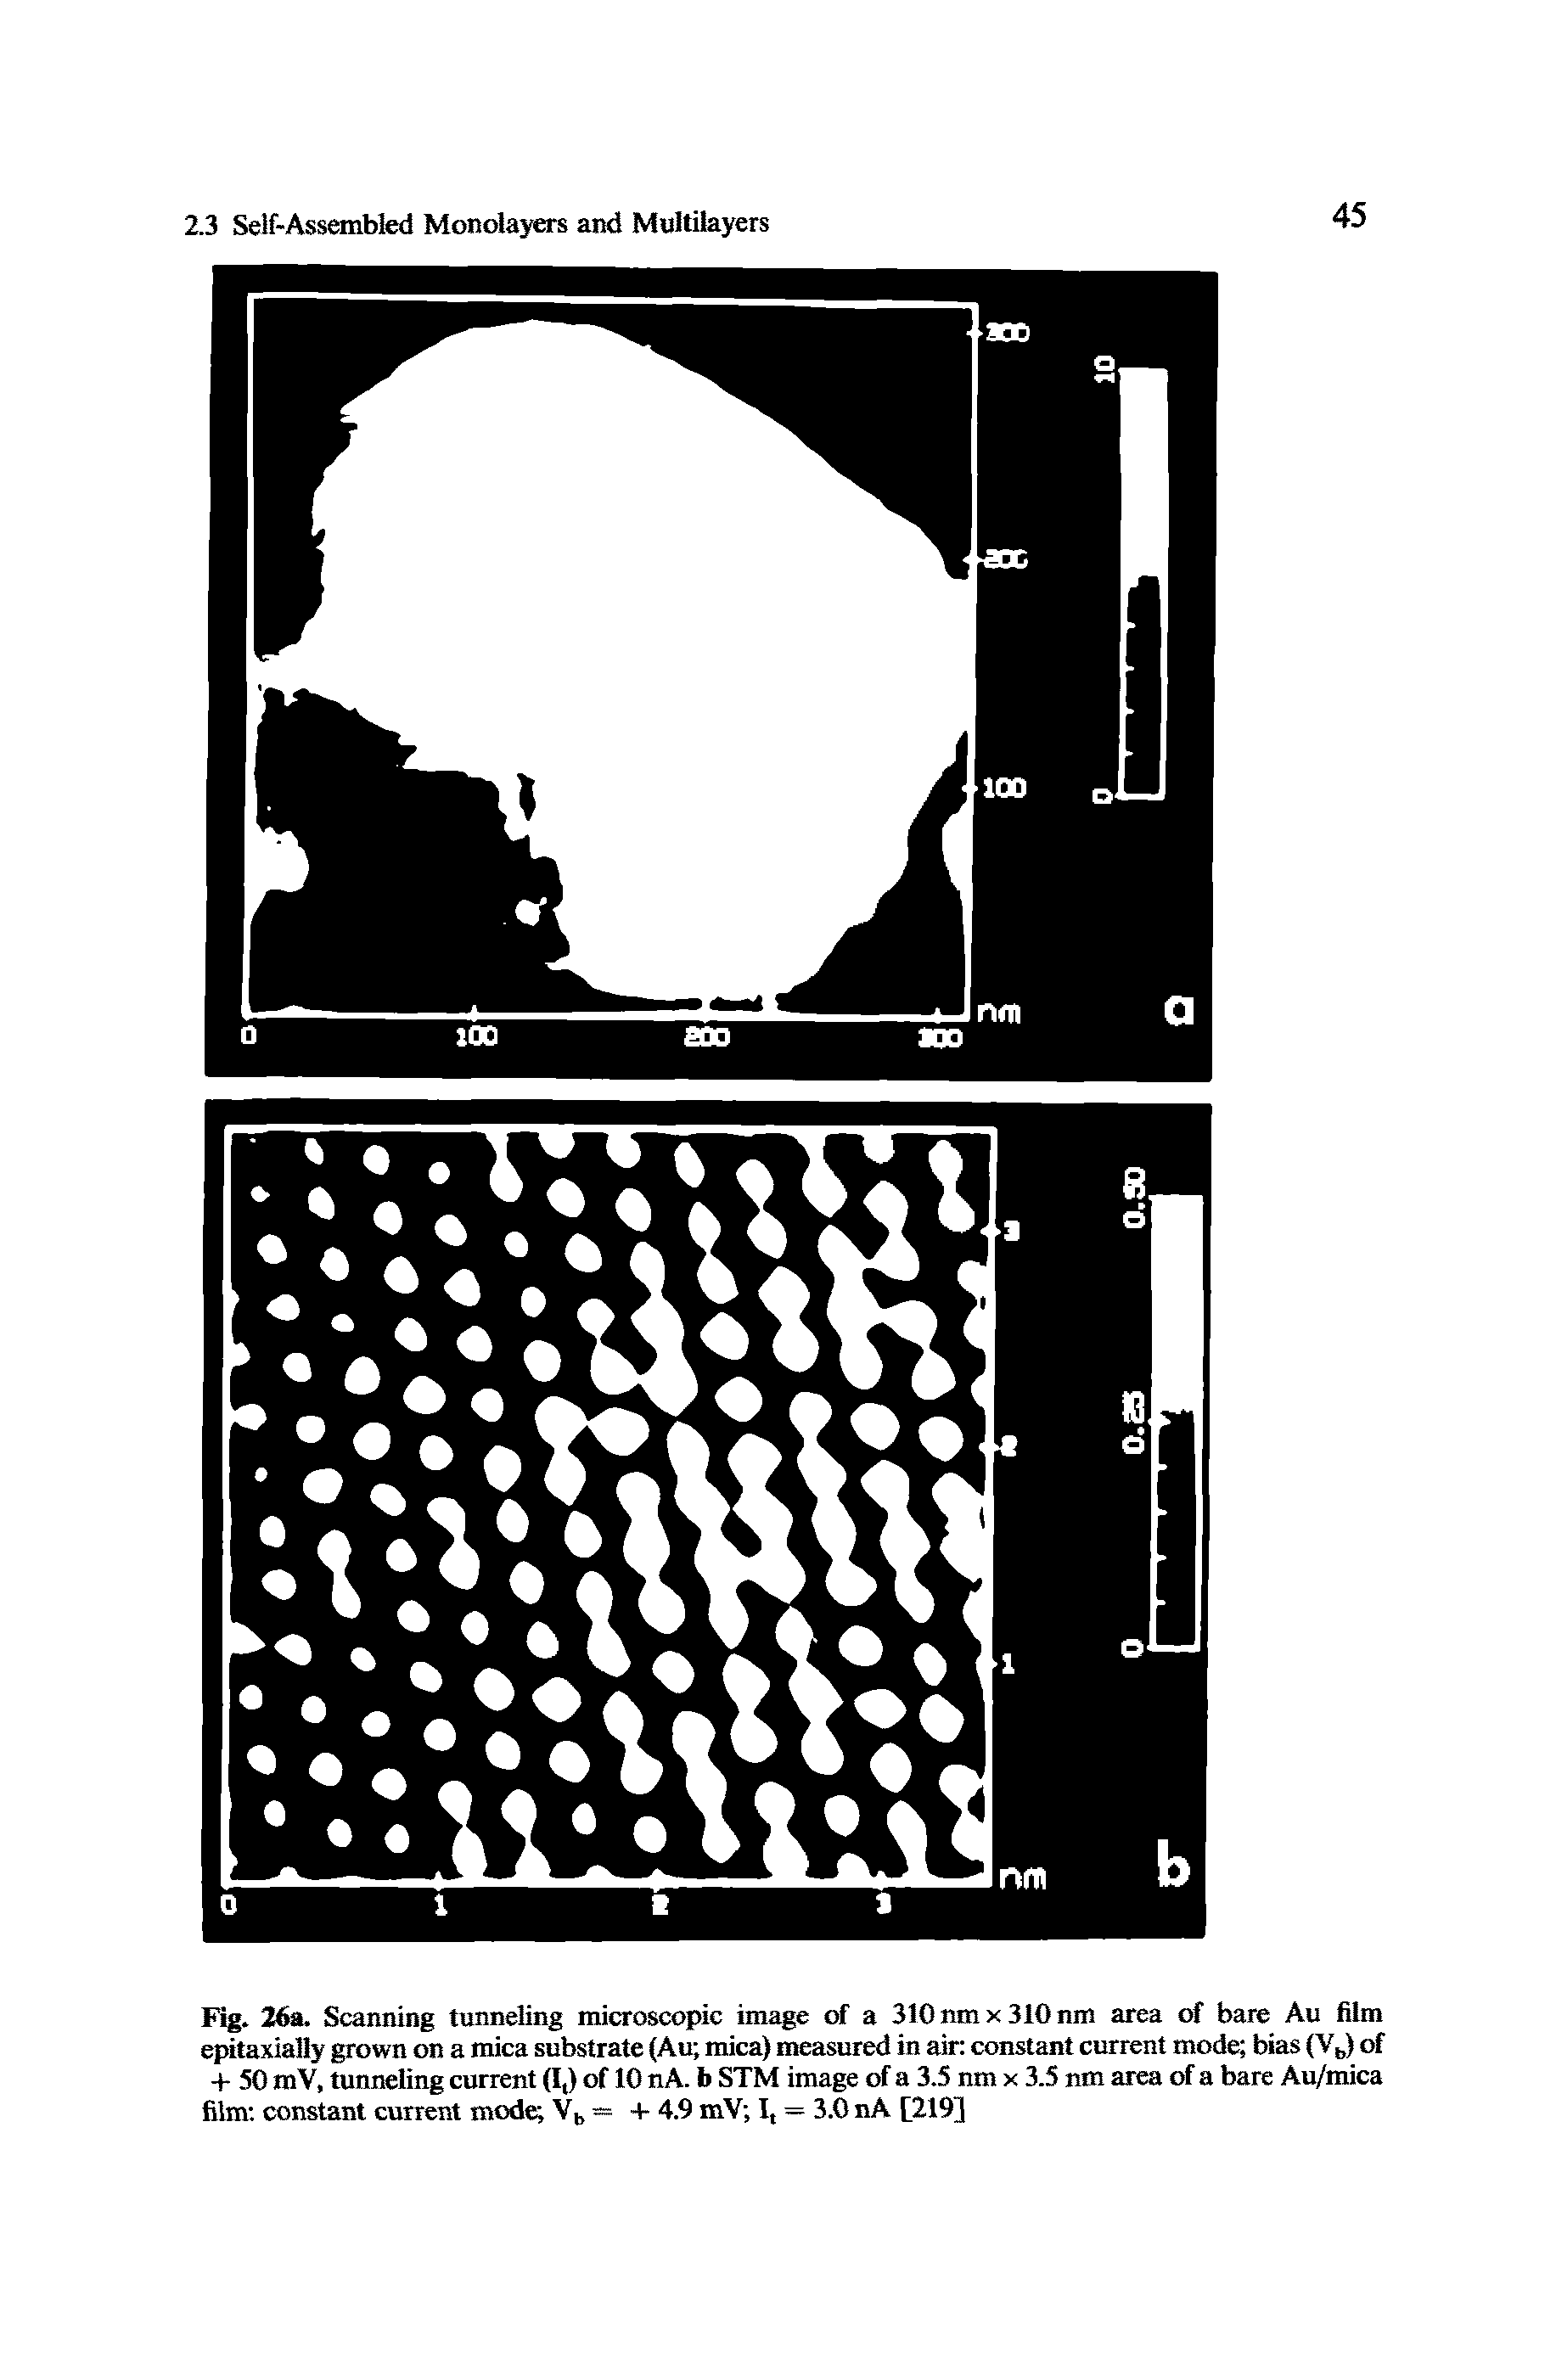 Fig. 26a. Scanning tunneling microscopic image of a 310nmx310nm area of bare Au film epitaxially grown on a mica substrate (Au mica) measured in air constant current mode bias (Vb) of + 50 mV, tunneling current (I,) of 10 nA. b STM image of a 3.5 nm x 3.5 nm area of a bare Au/mica film constant current mode Vb = 4- 4.9 mV I, = 3.0 nA [219]...